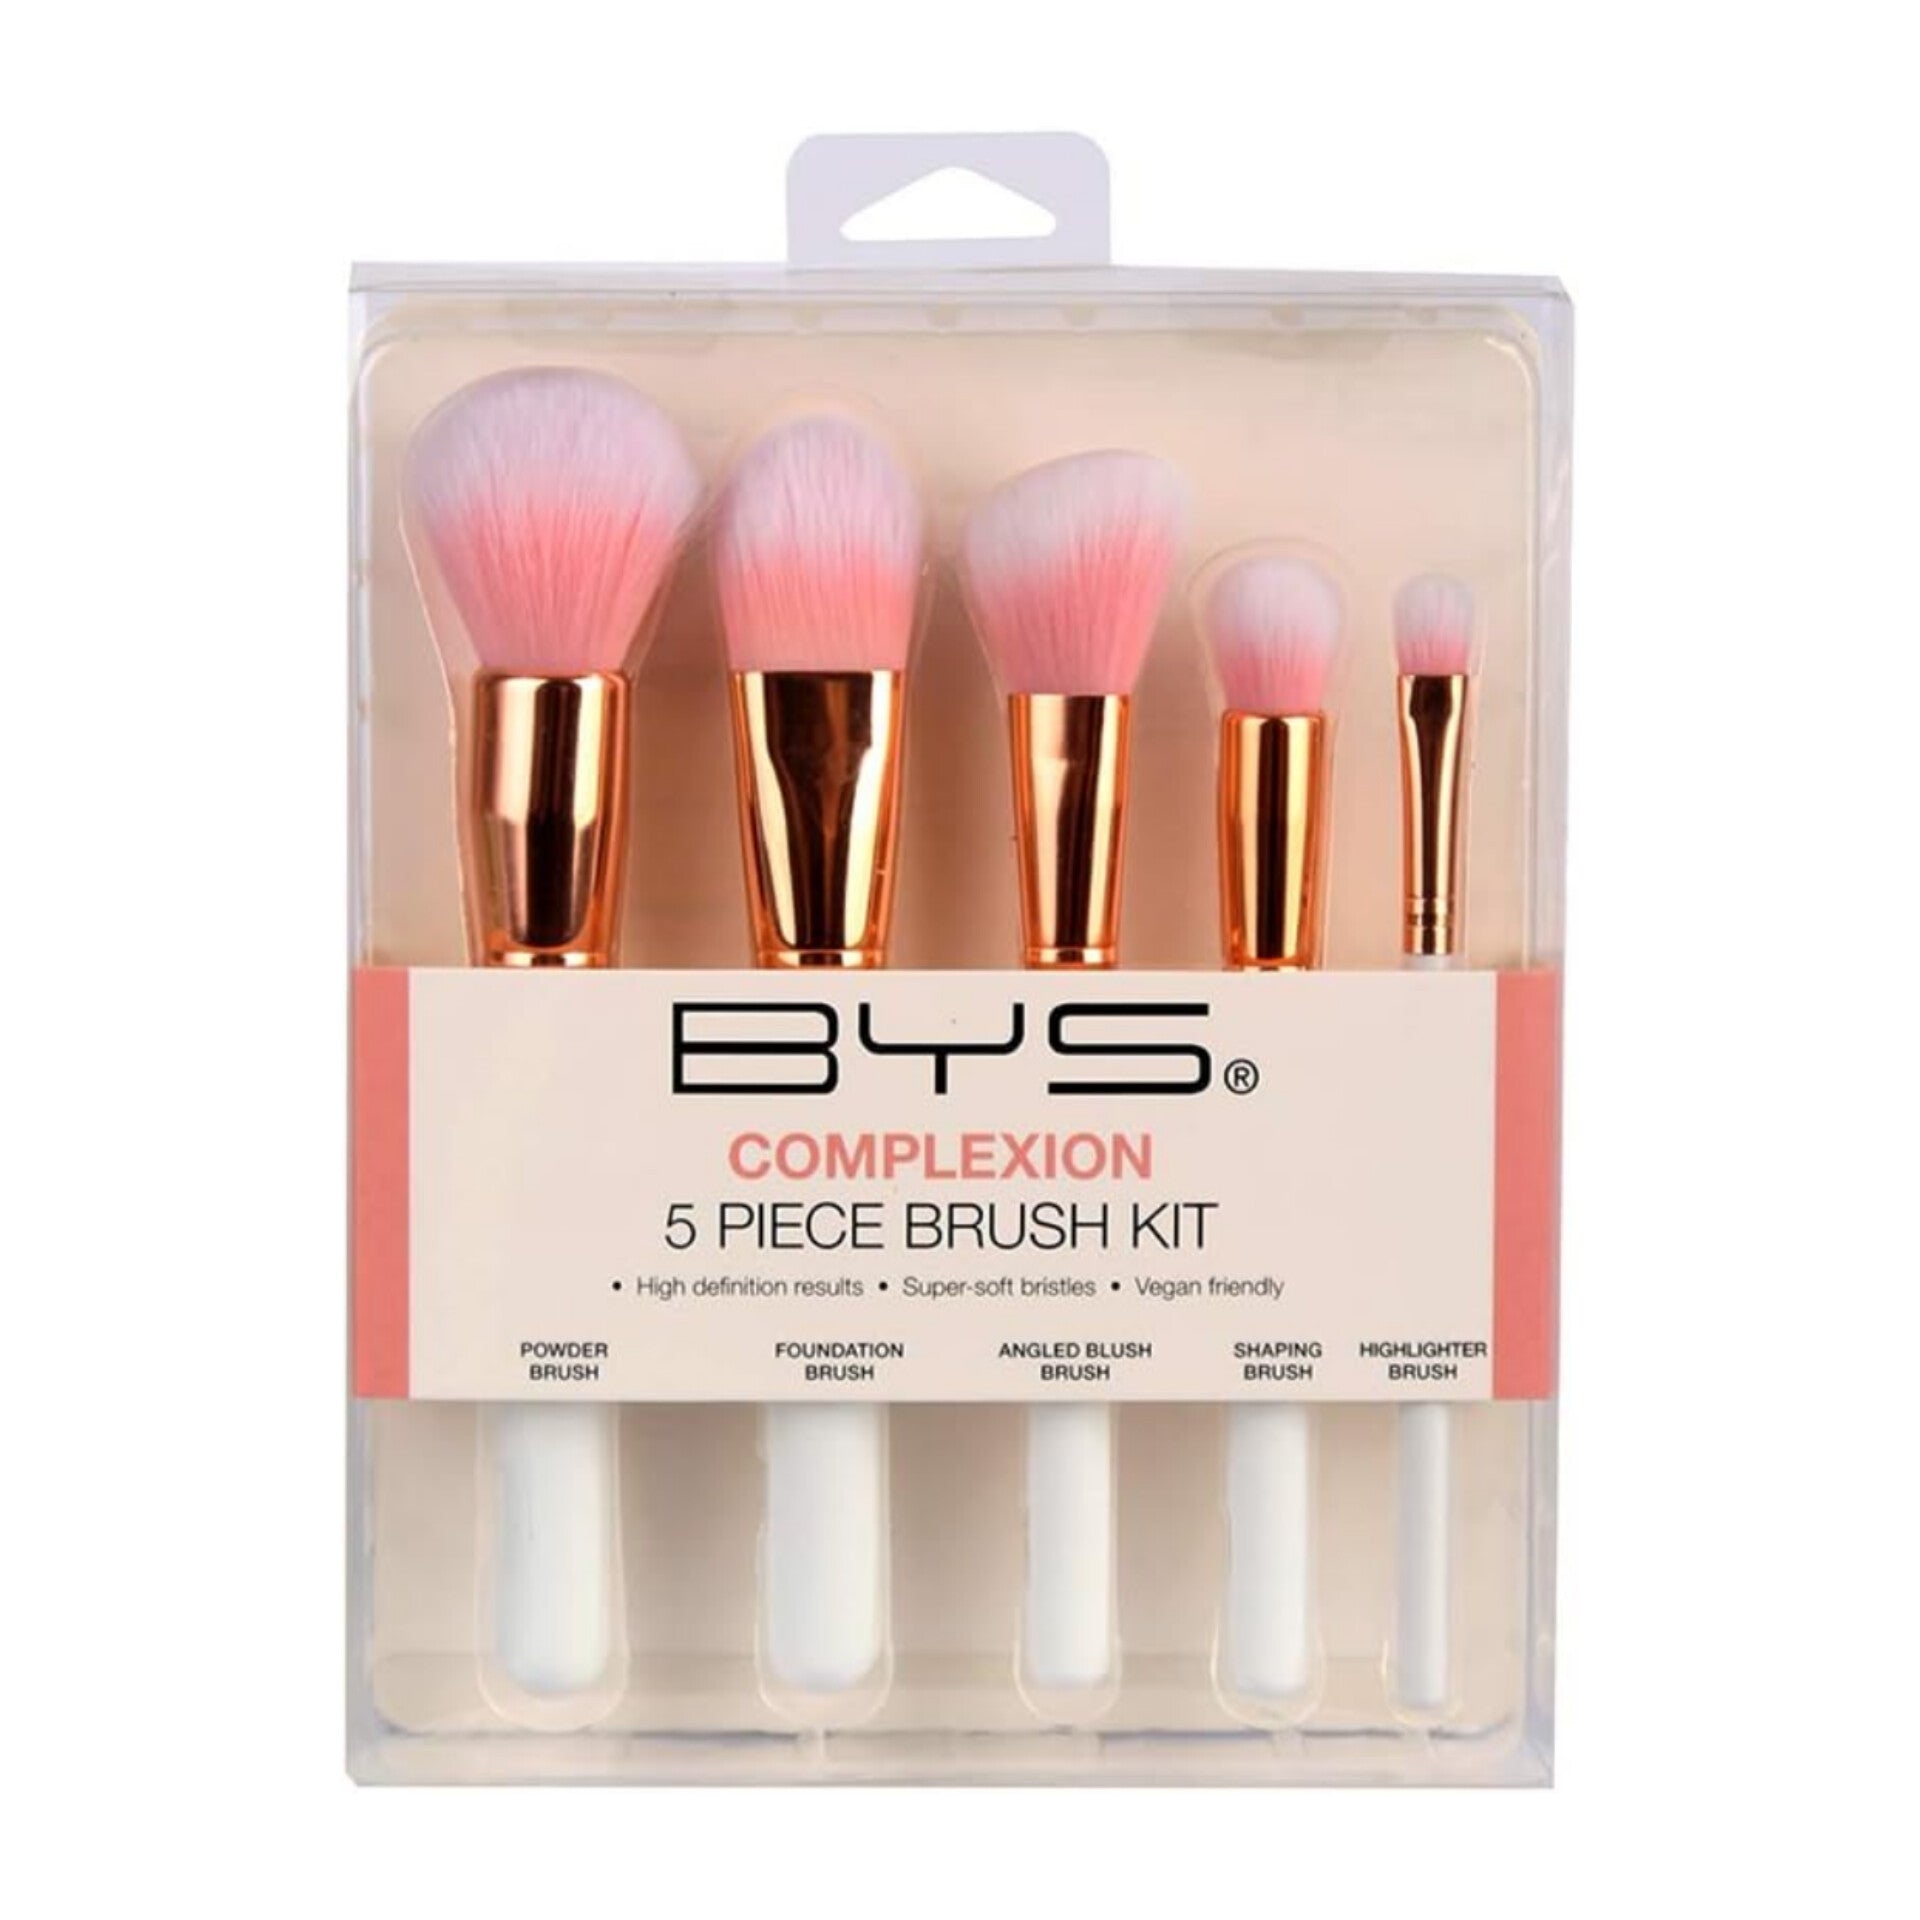 bys-complexion-5-piece-brush-kit